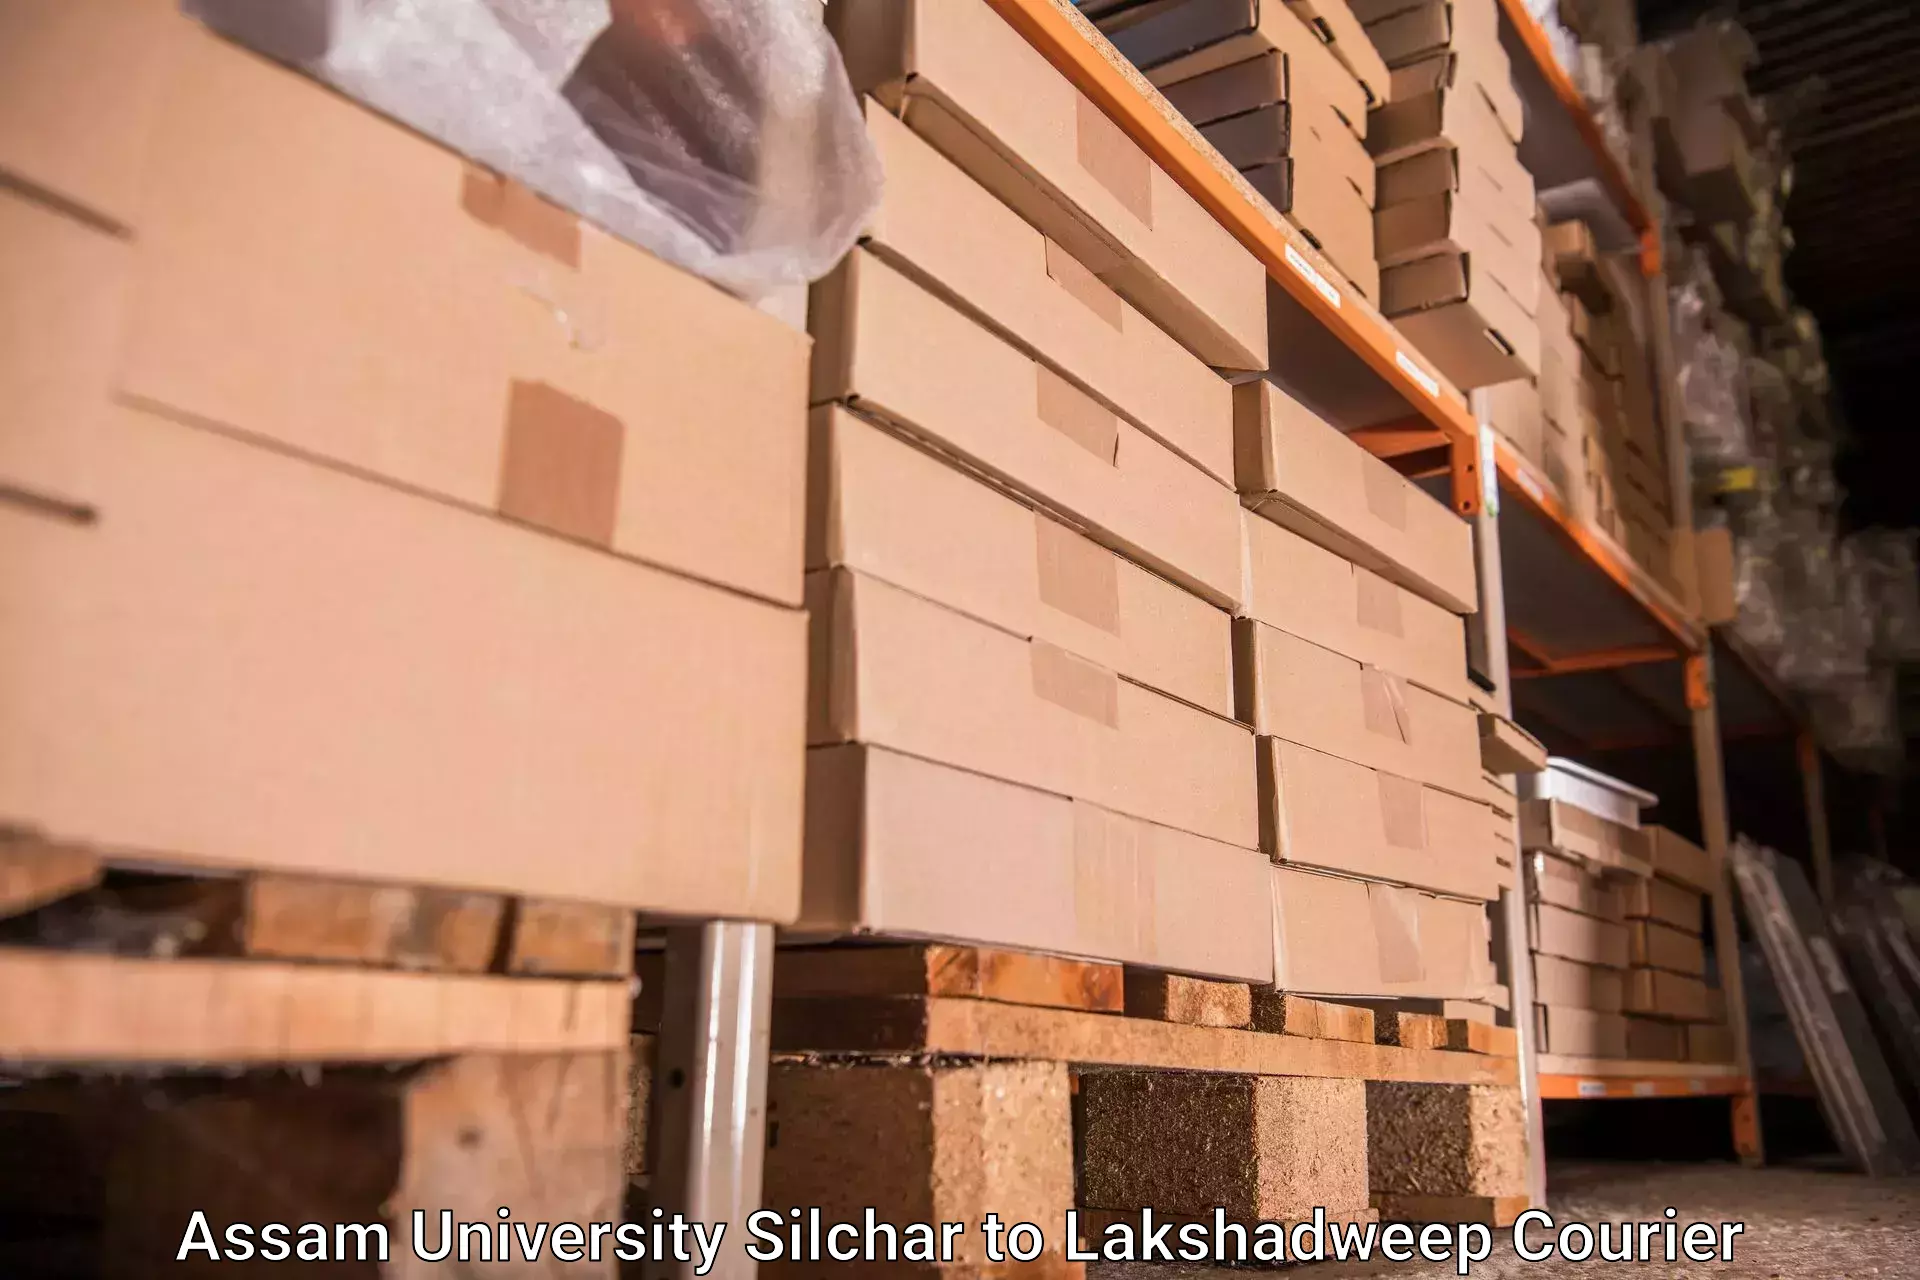 Baggage delivery technology Assam University Silchar to Lakshadweep